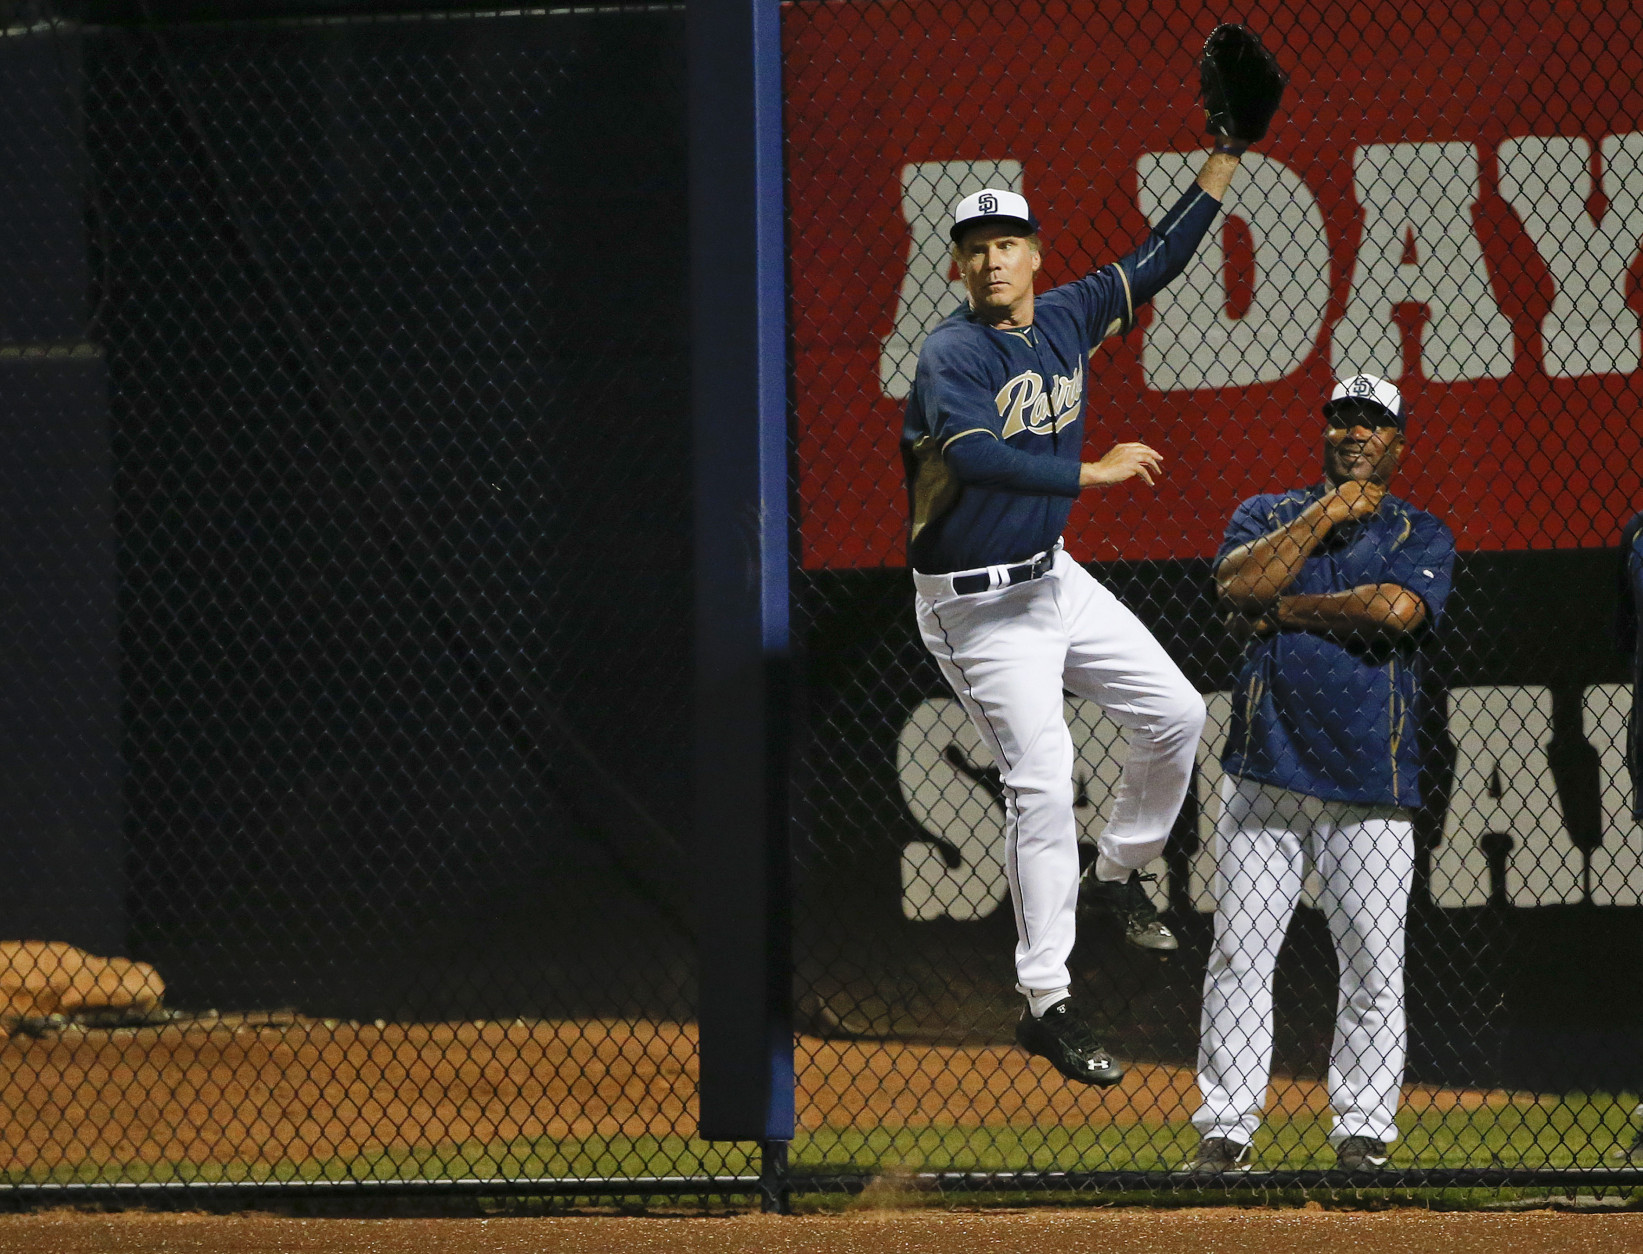 Actor Will Ferrell, playing right field for the San Diego Padres in a spring training baseball game, leaps at the right field fence long ax a home run by Los Angeles Dodgers' Joc Pederson cleared the fence by a wide margin Thursday, March 12, 2015, in Peoria, Ariz. (AP Photo/Lenny Ignelzi)